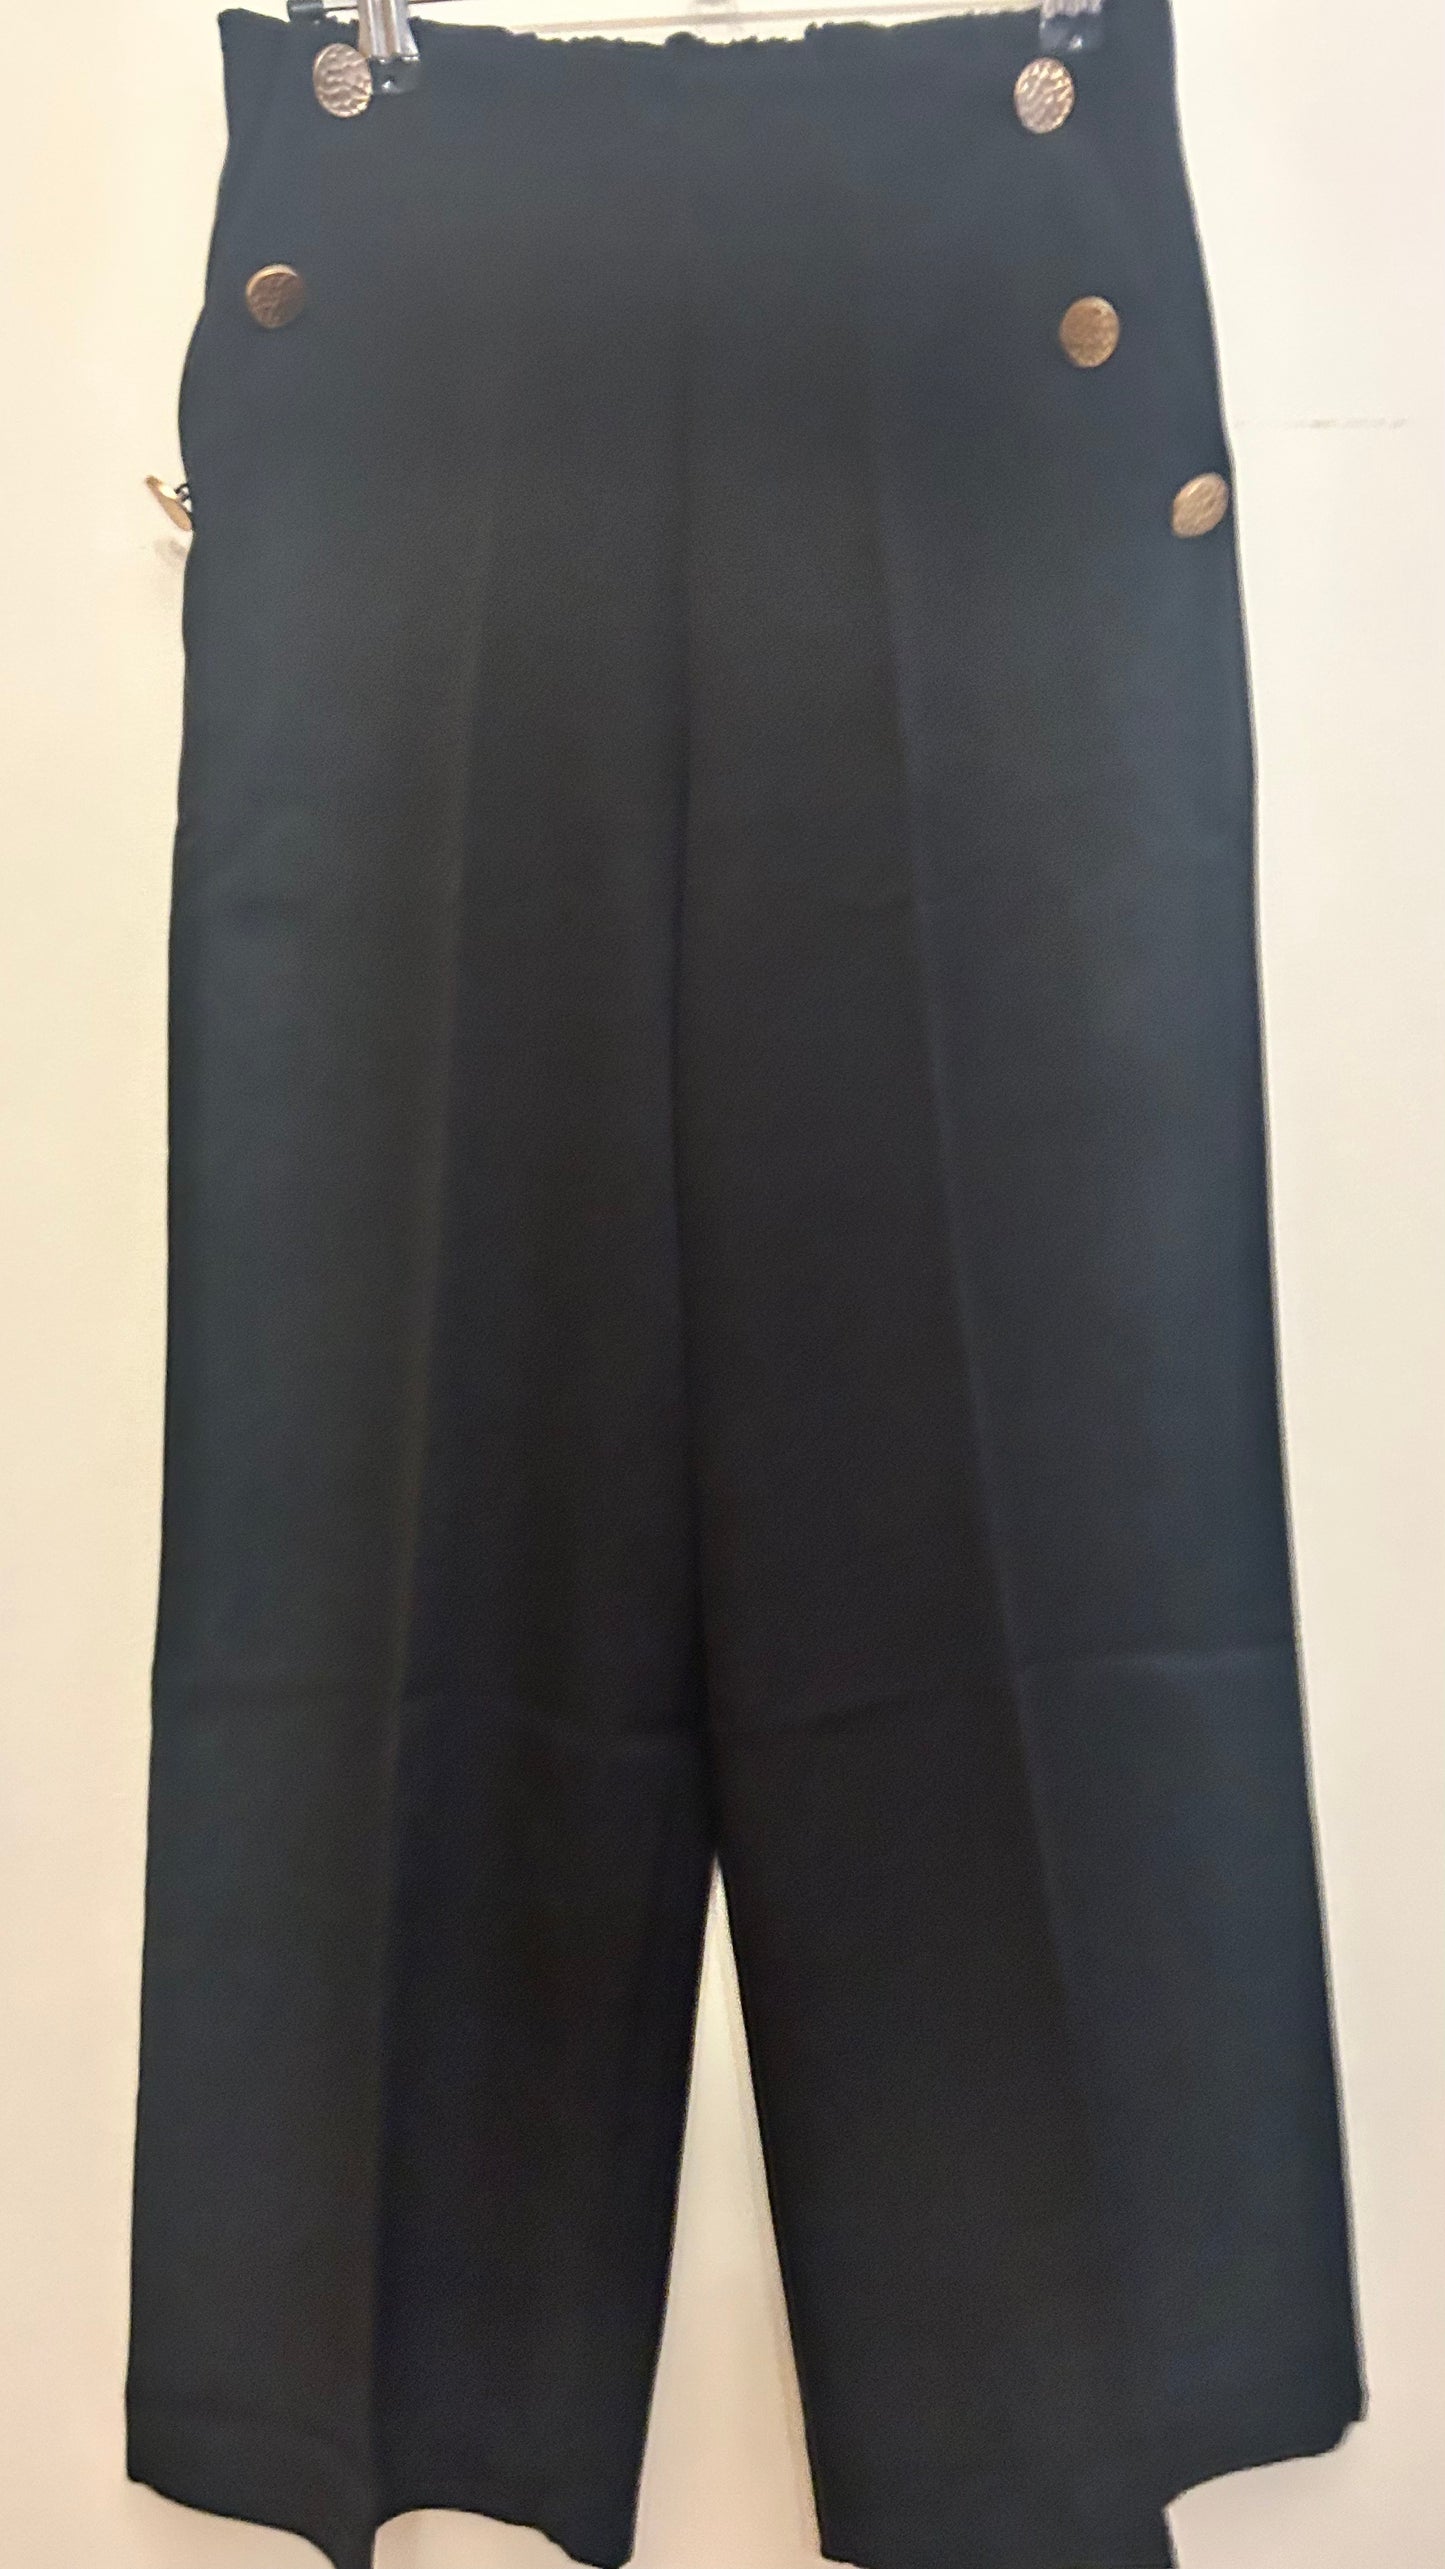 3/4 Length Trouser With Gold Button Detail